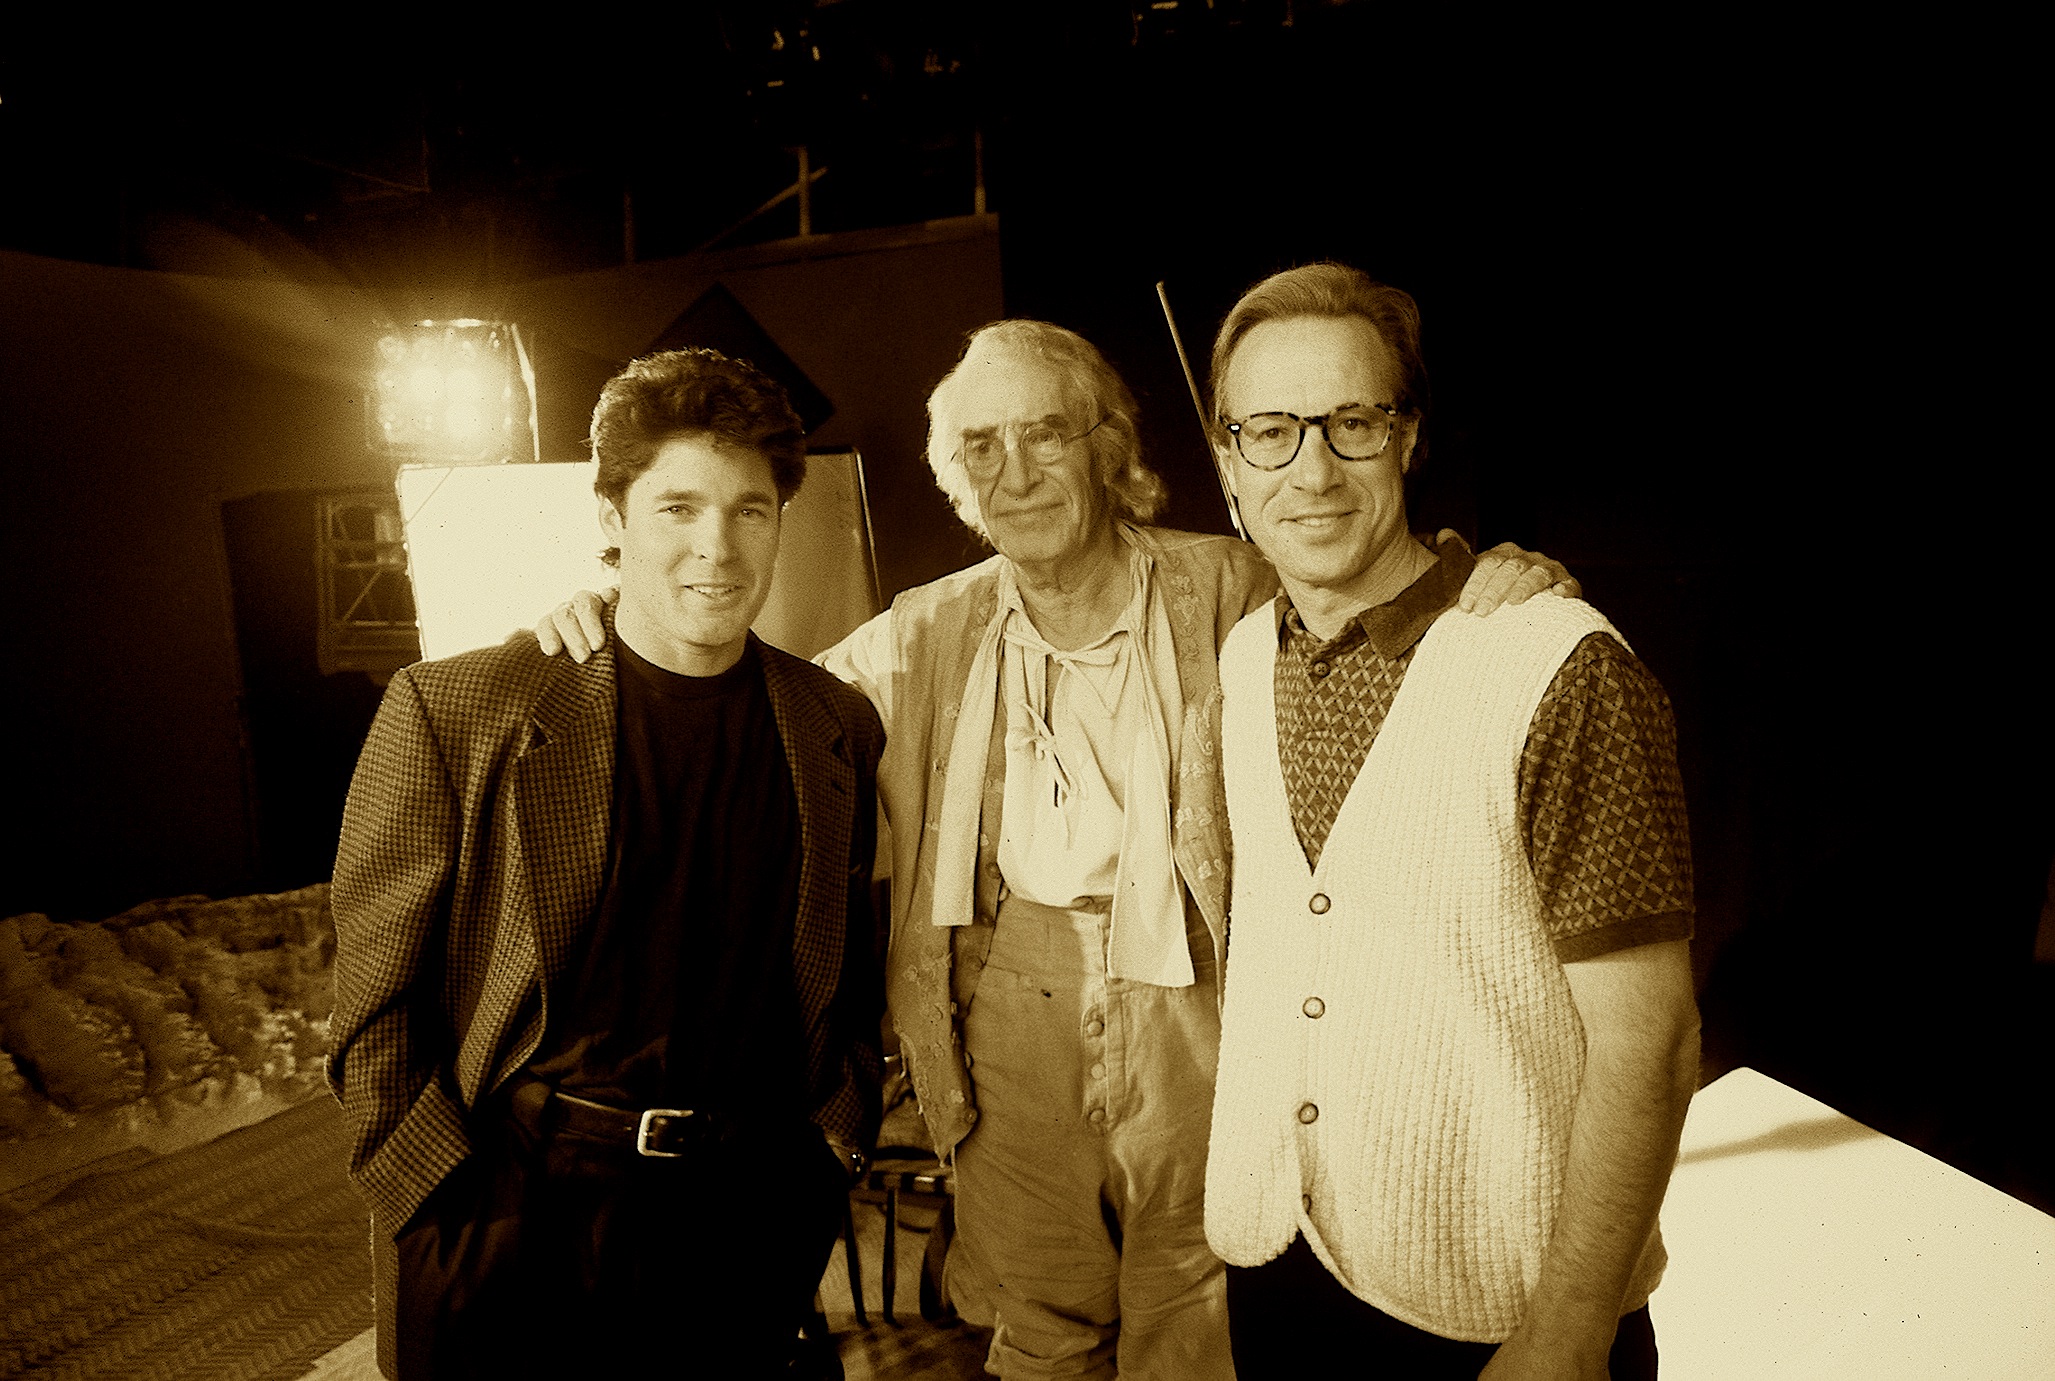 Director Ken Berris poses with Lionsgate Digital President Curt Marvis and Oscar winner Martin Landau on the set of Pinocchio.